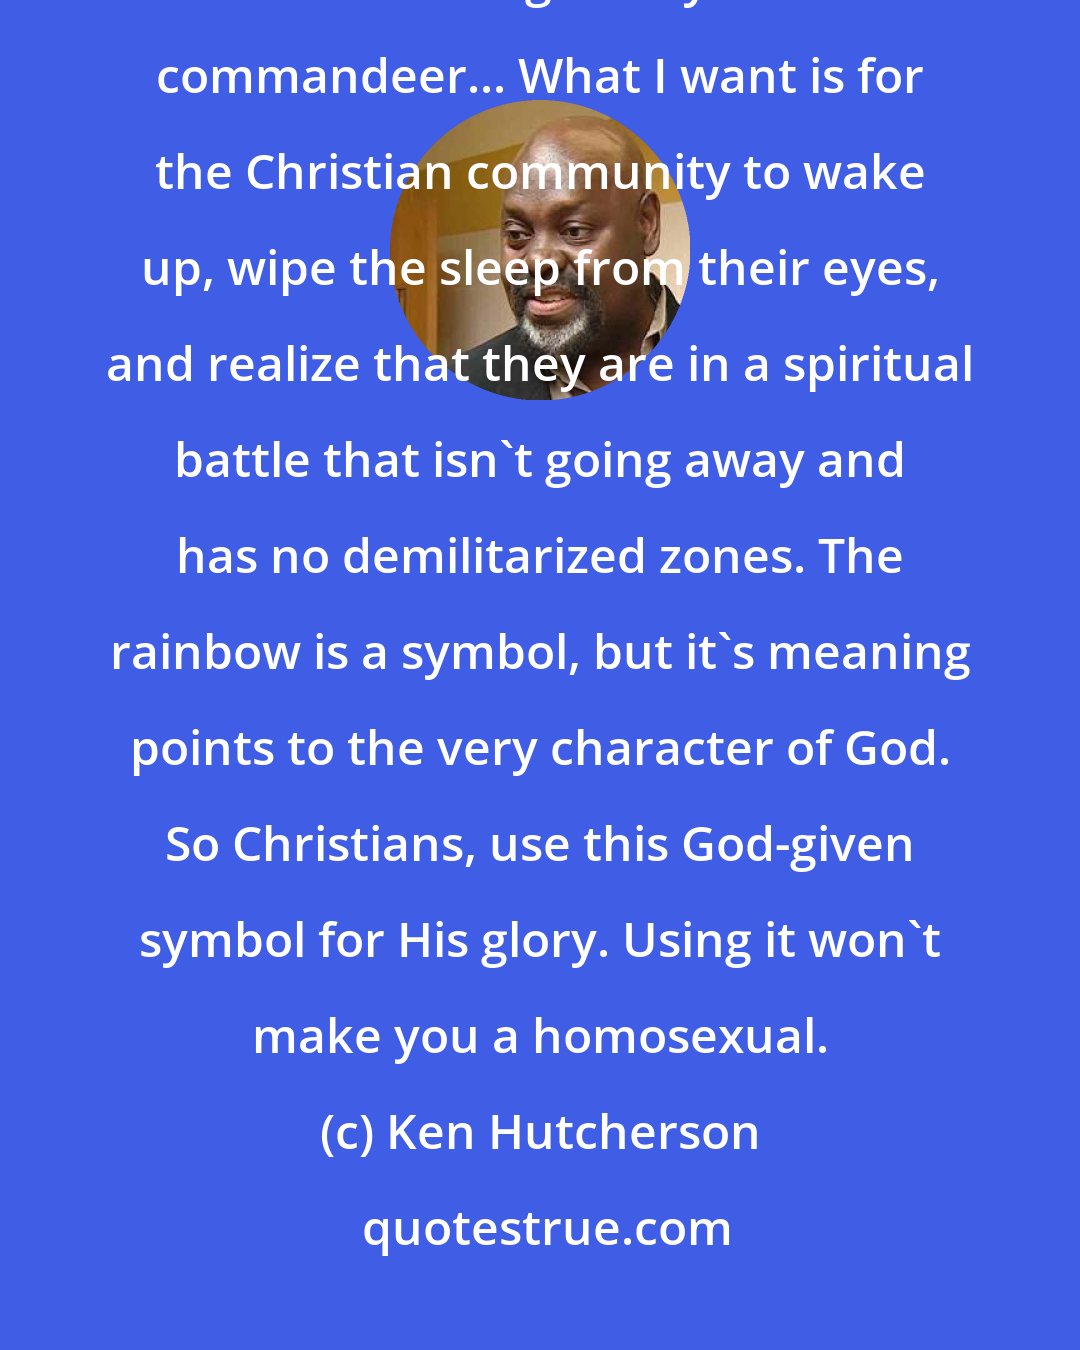 Ken Hutcherson: Let's take back the rainbow for God. Let the homosexual community find a different religious symbol to commandeer... What I want is for the Christian community to wake up, wipe the sleep from their eyes, and realize that they are in a spiritual battle that isn't going away and has no demilitarized zones. The rainbow is a symbol, but it's meaning points to the very character of God. So Christians, use this God-given symbol for His glory. Using it won't make you a homosexual.